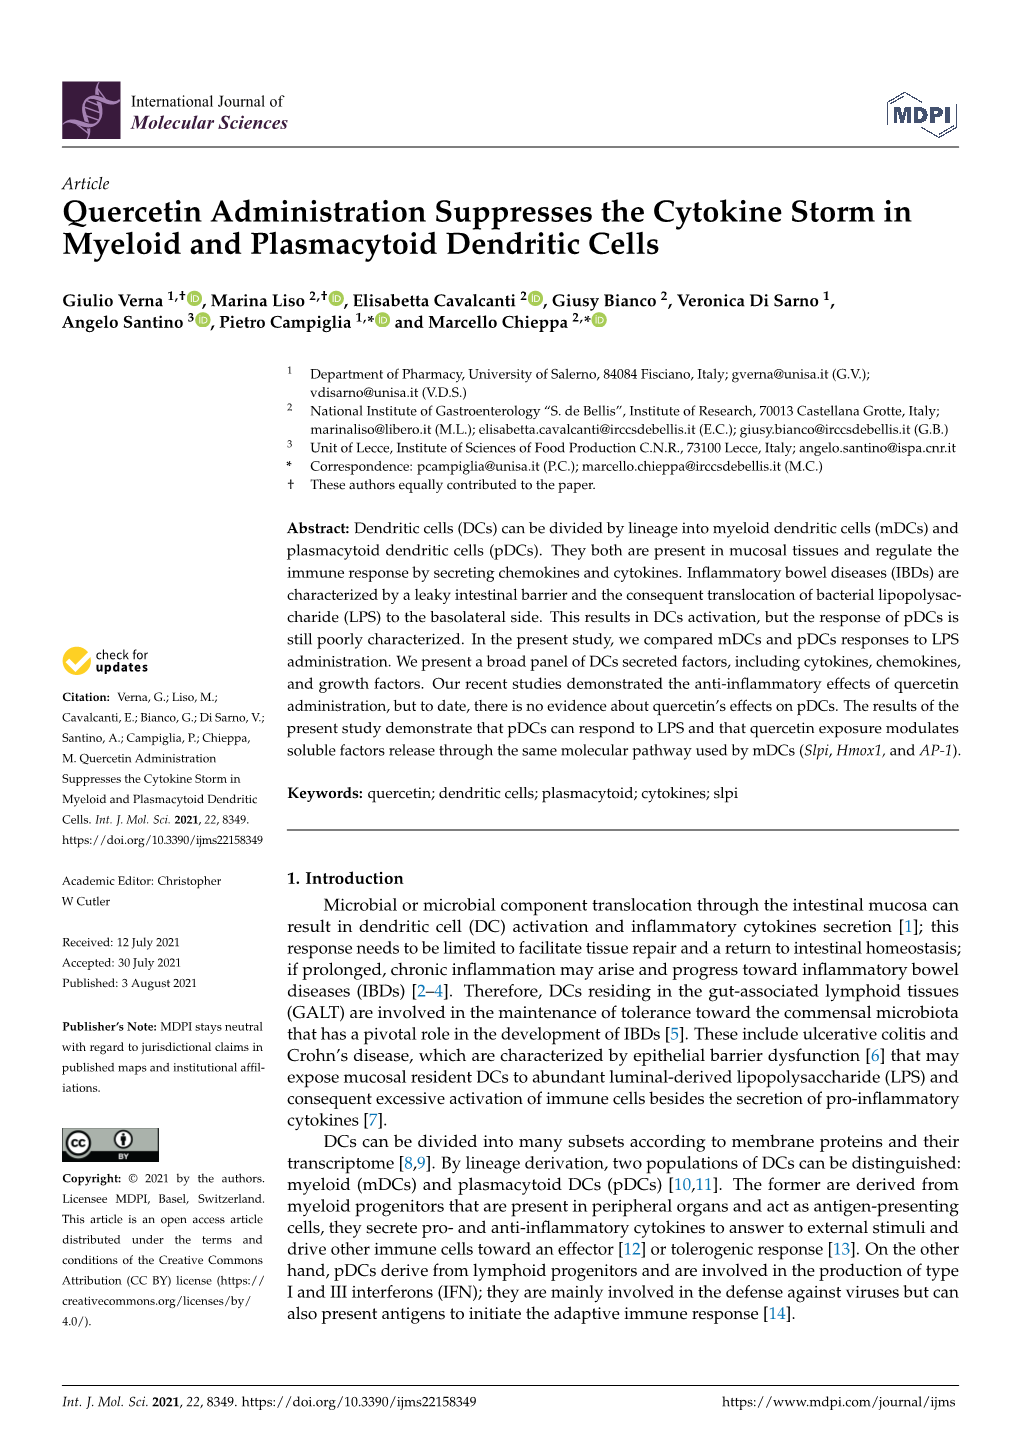 Quercetin Administration Suppresses the Cytokine Storm in Myeloid and Plasmacytoid Dendritic Cells